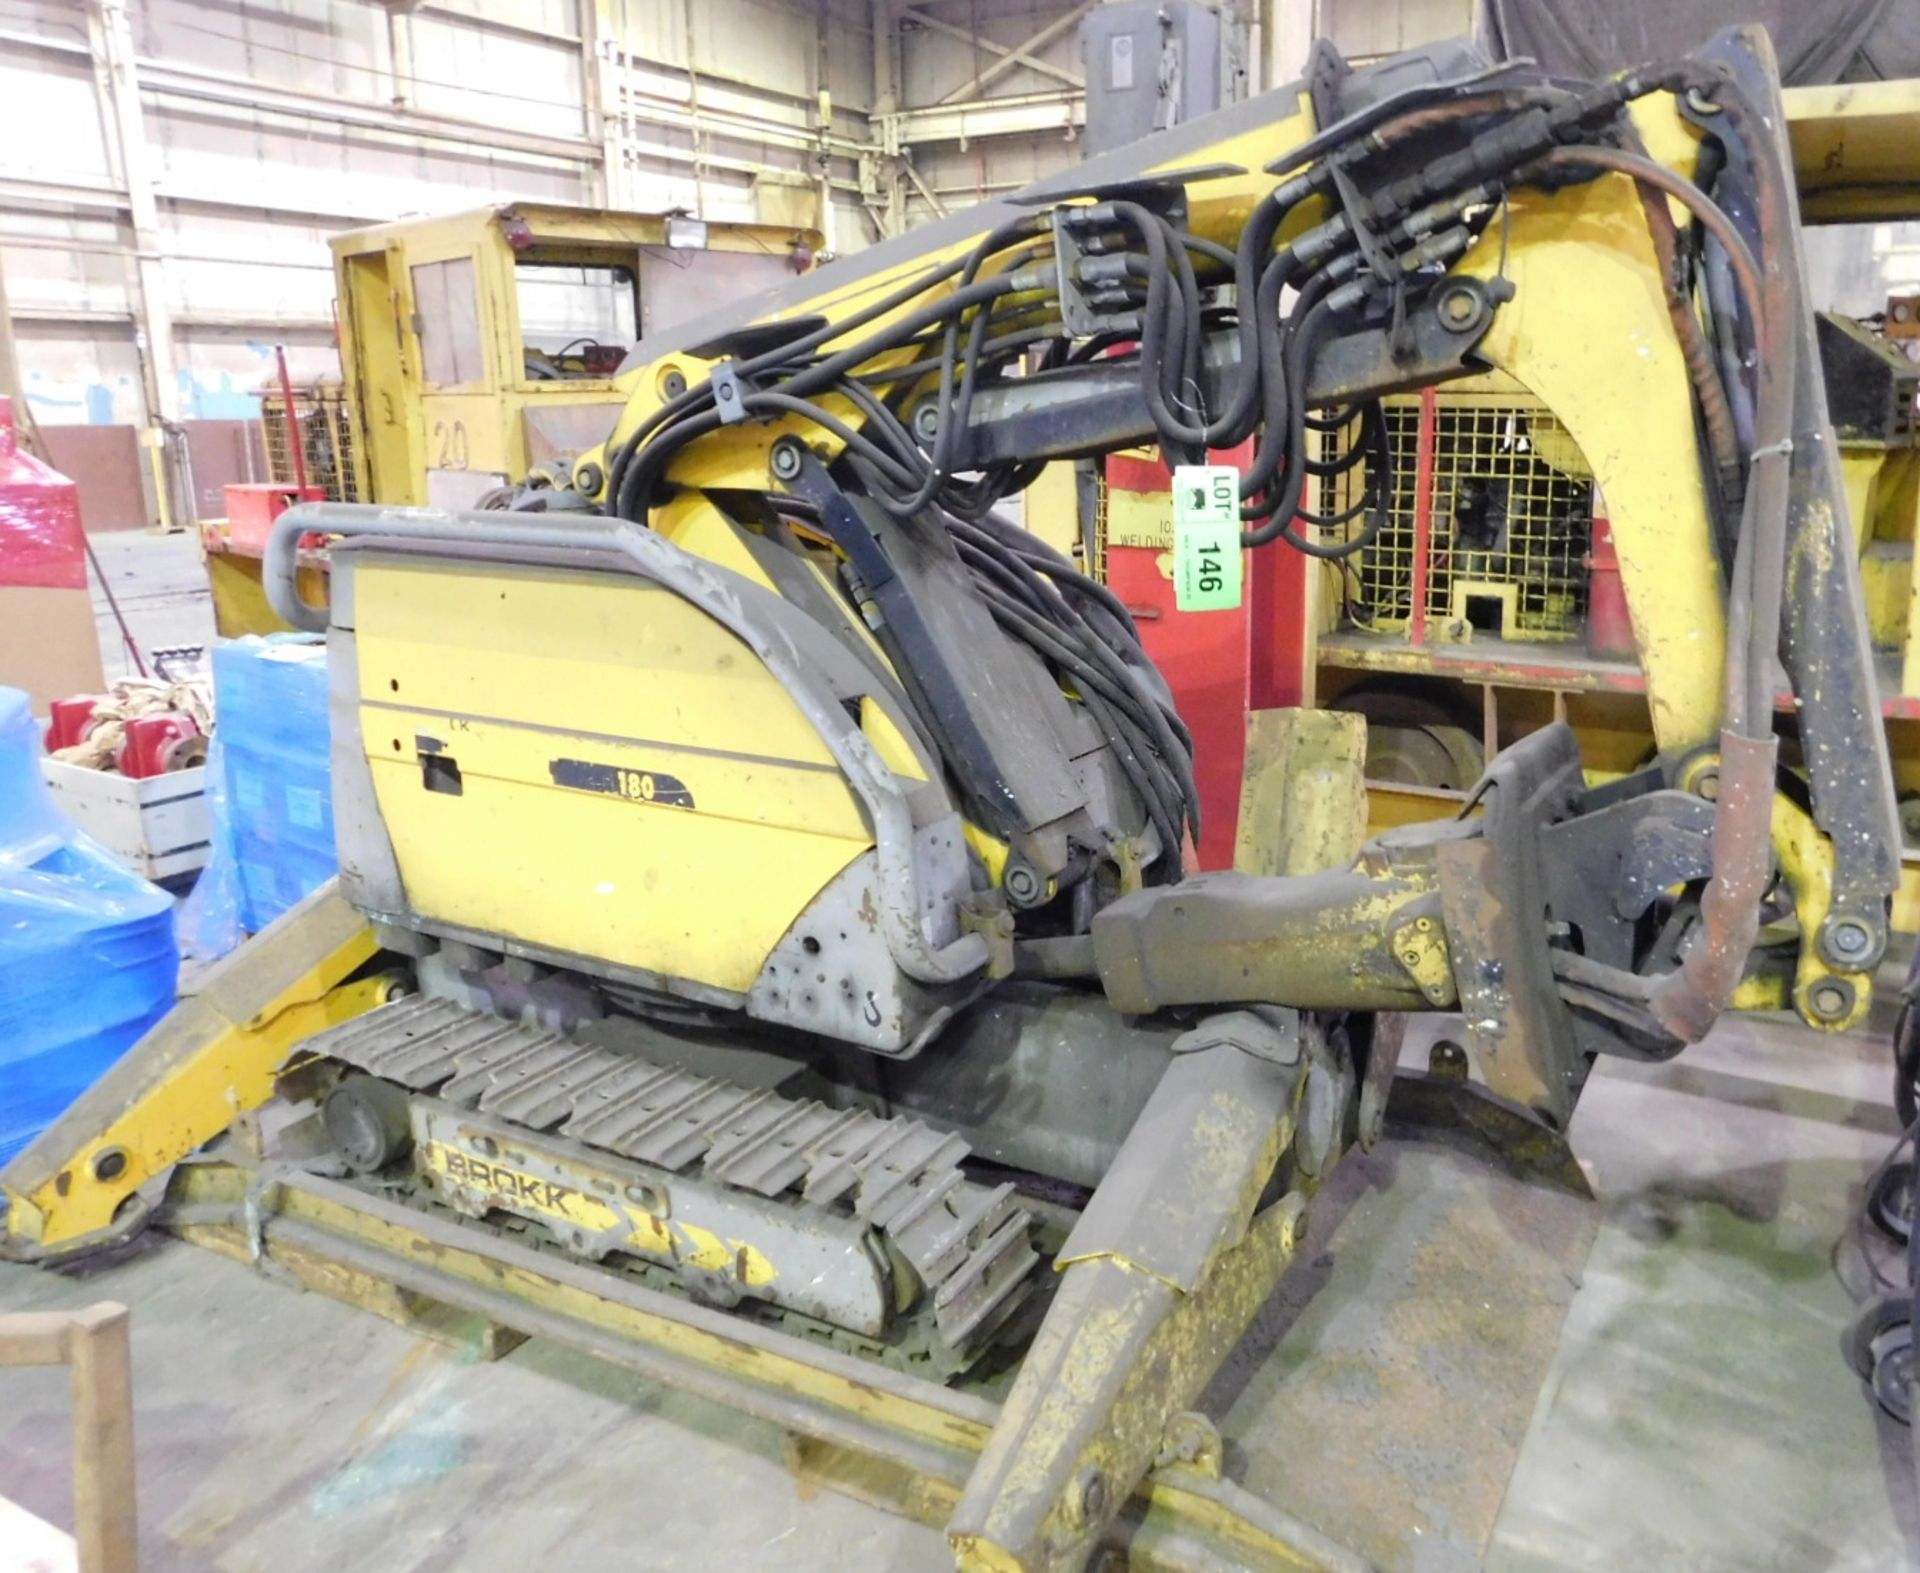 BROKK 180 ELECTRIC/ HYDRAULIC BACKHOE WITH HYDRAULIC BREAKER ATTACHMENT, STEEL CATERPILLAR TRACK, - Image 3 of 3